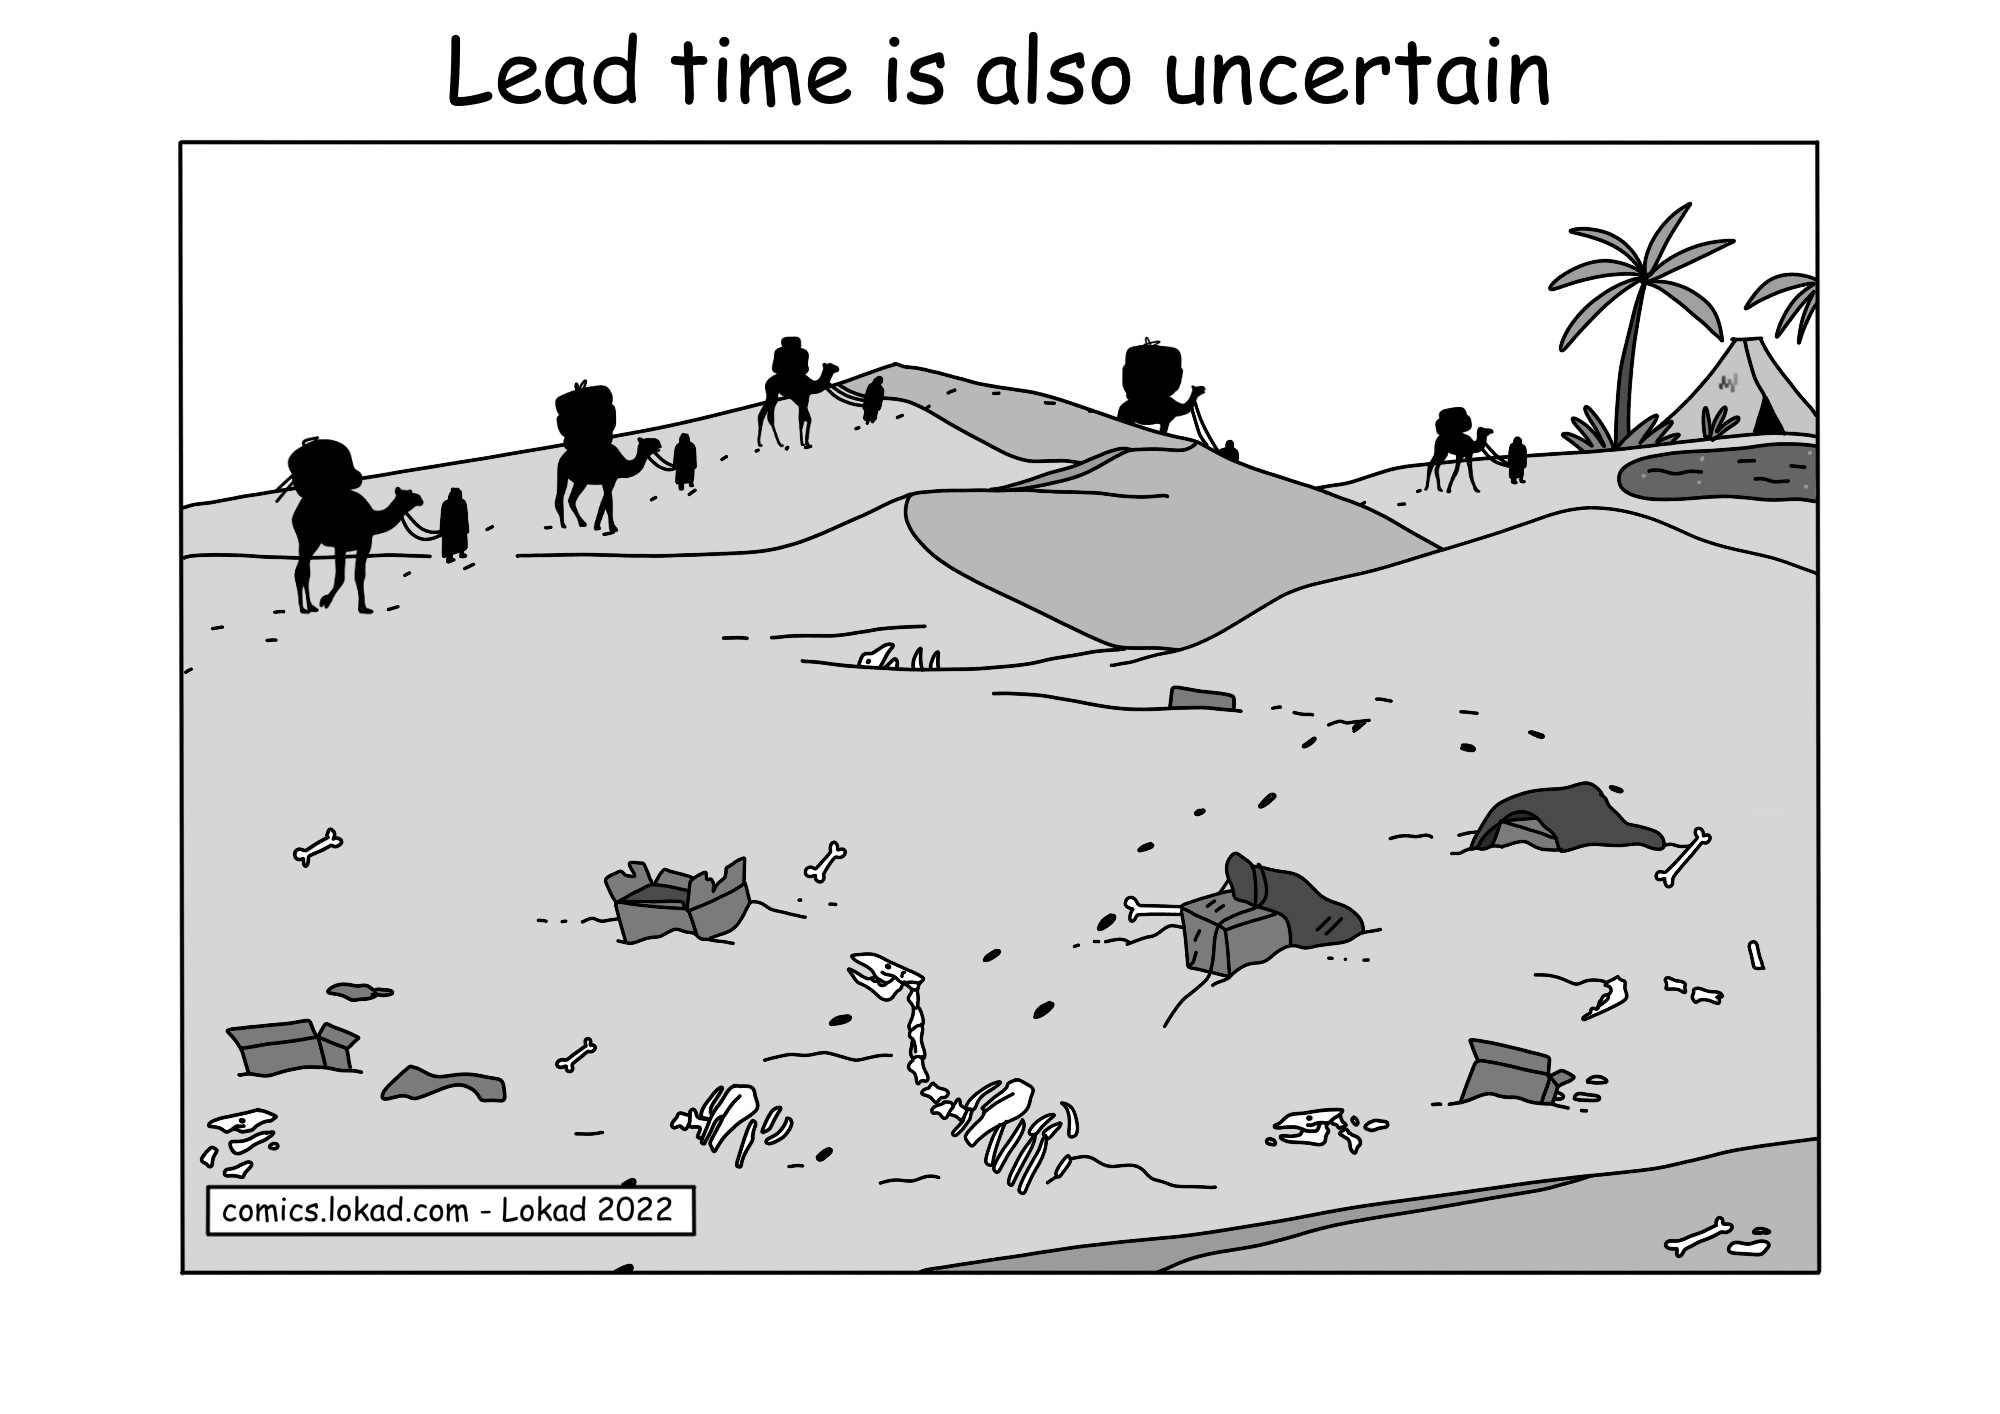 Lead time is also uncertain